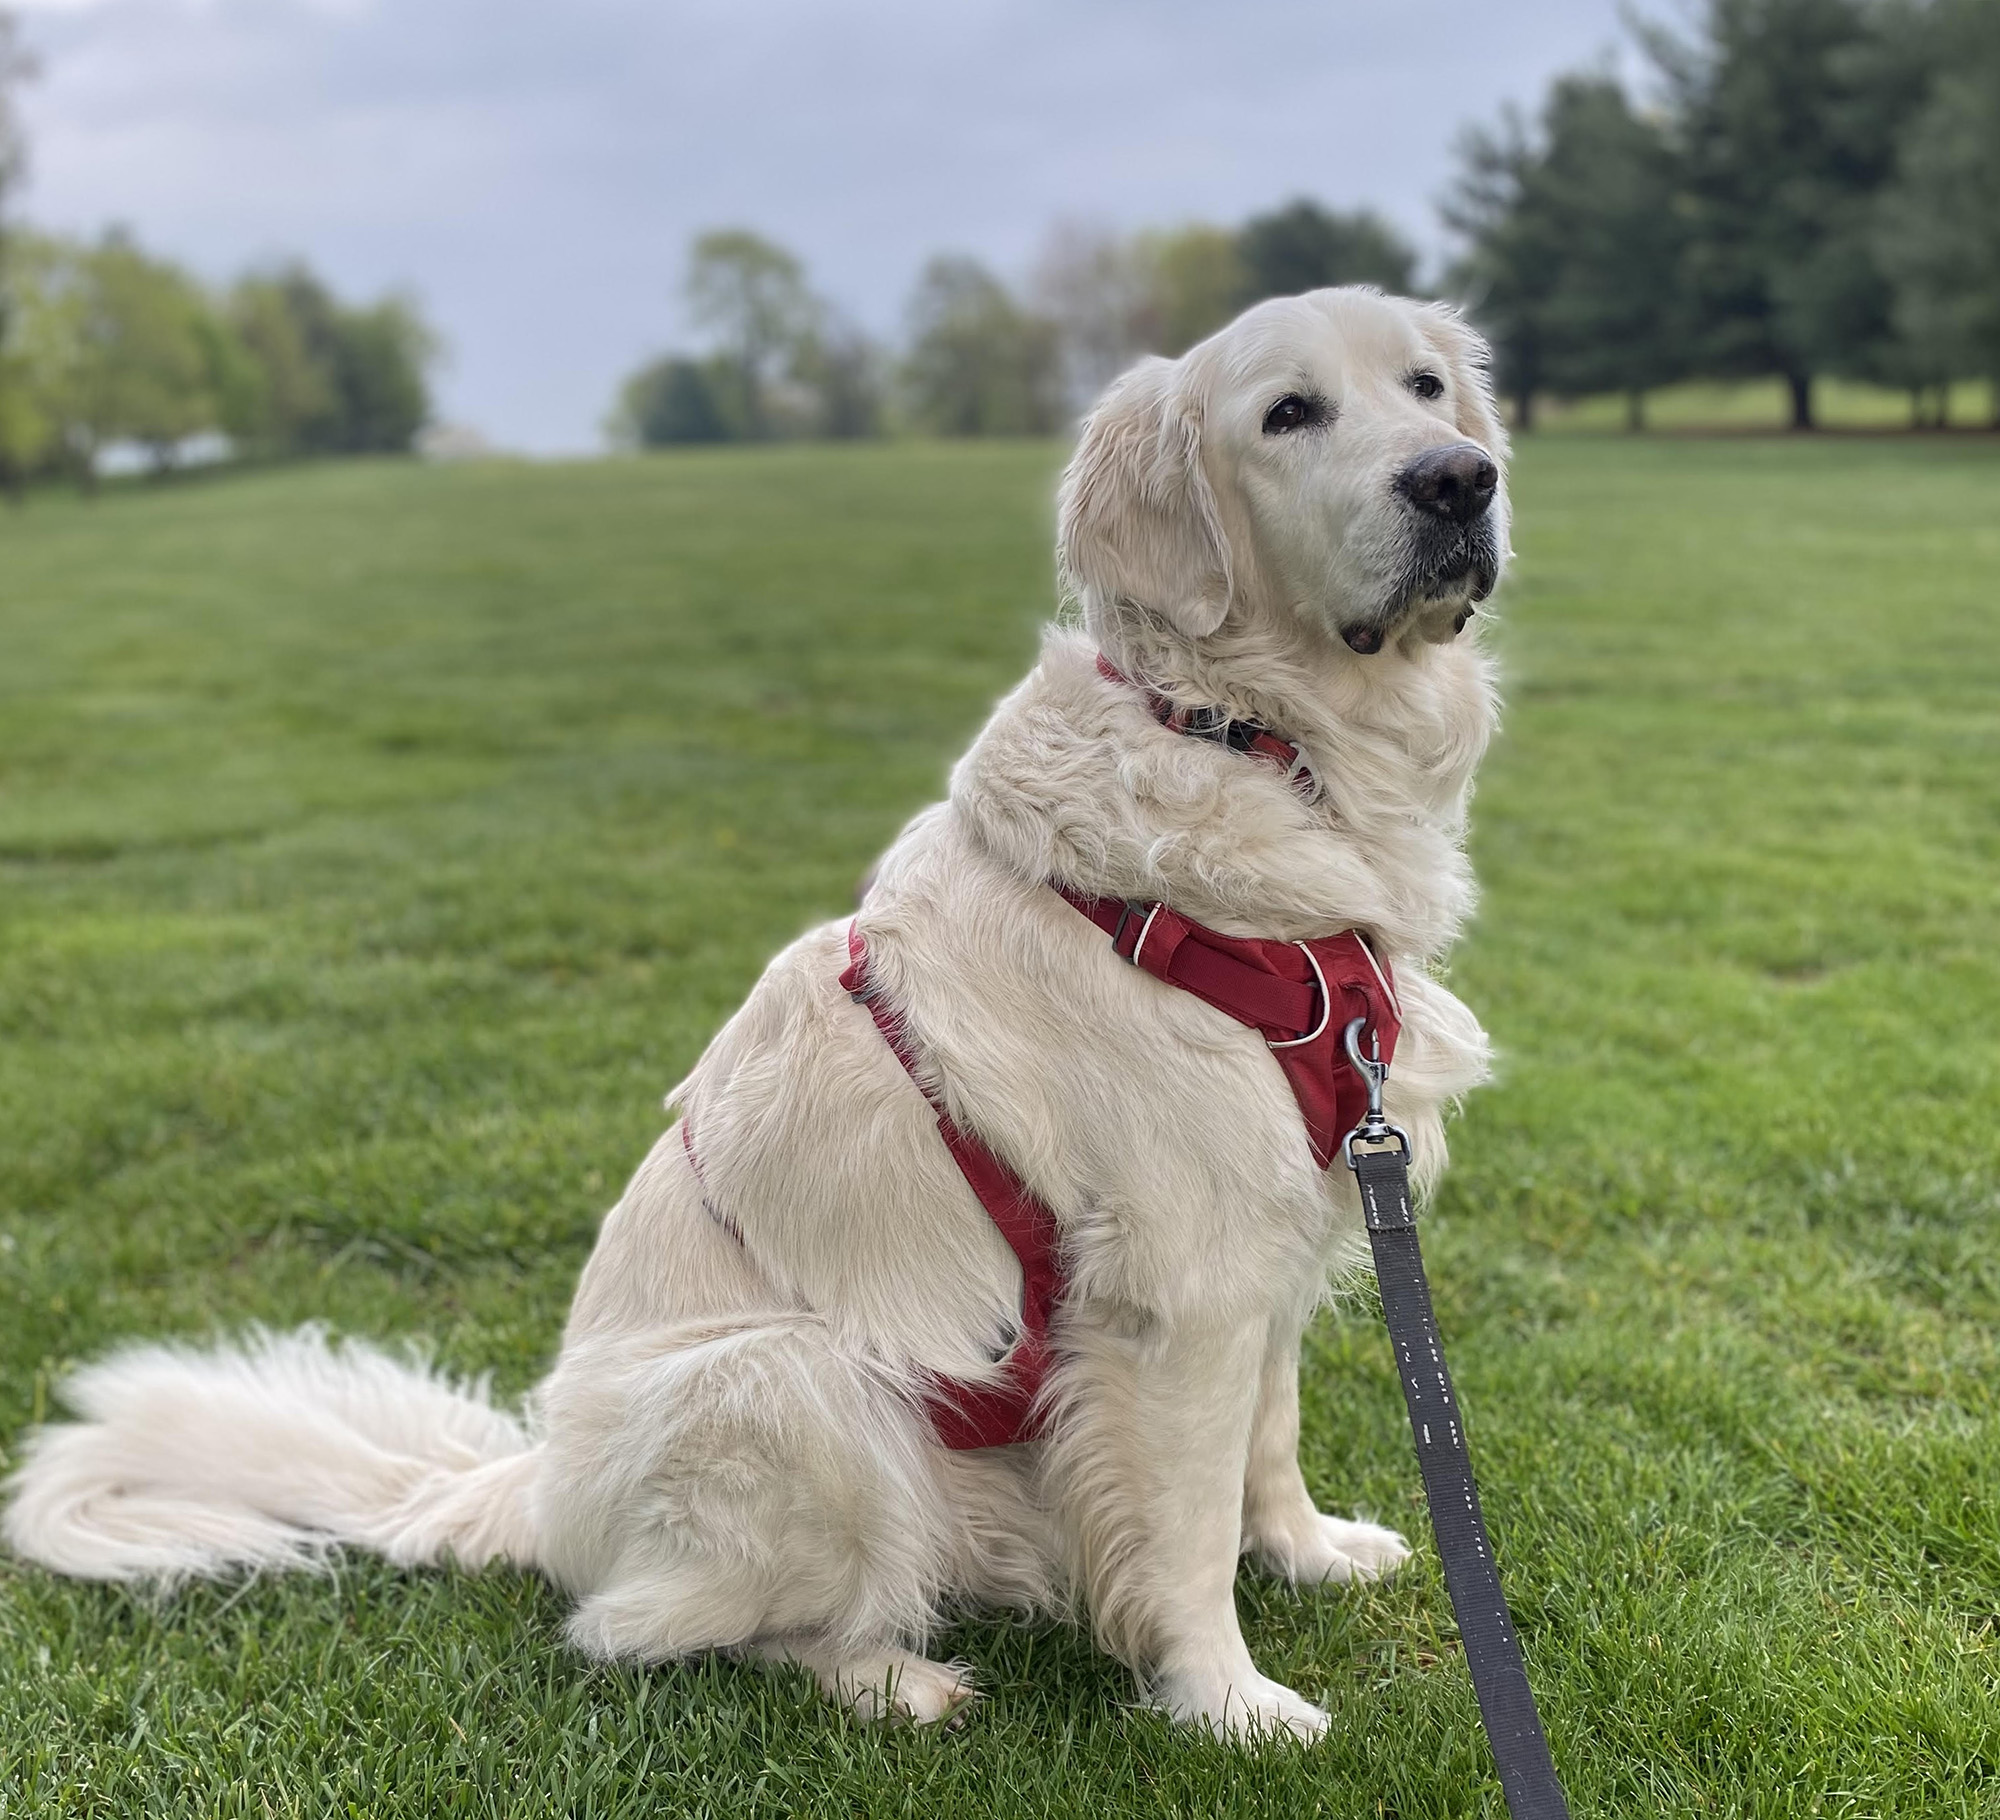 A Labrador sitting on a lead in a park